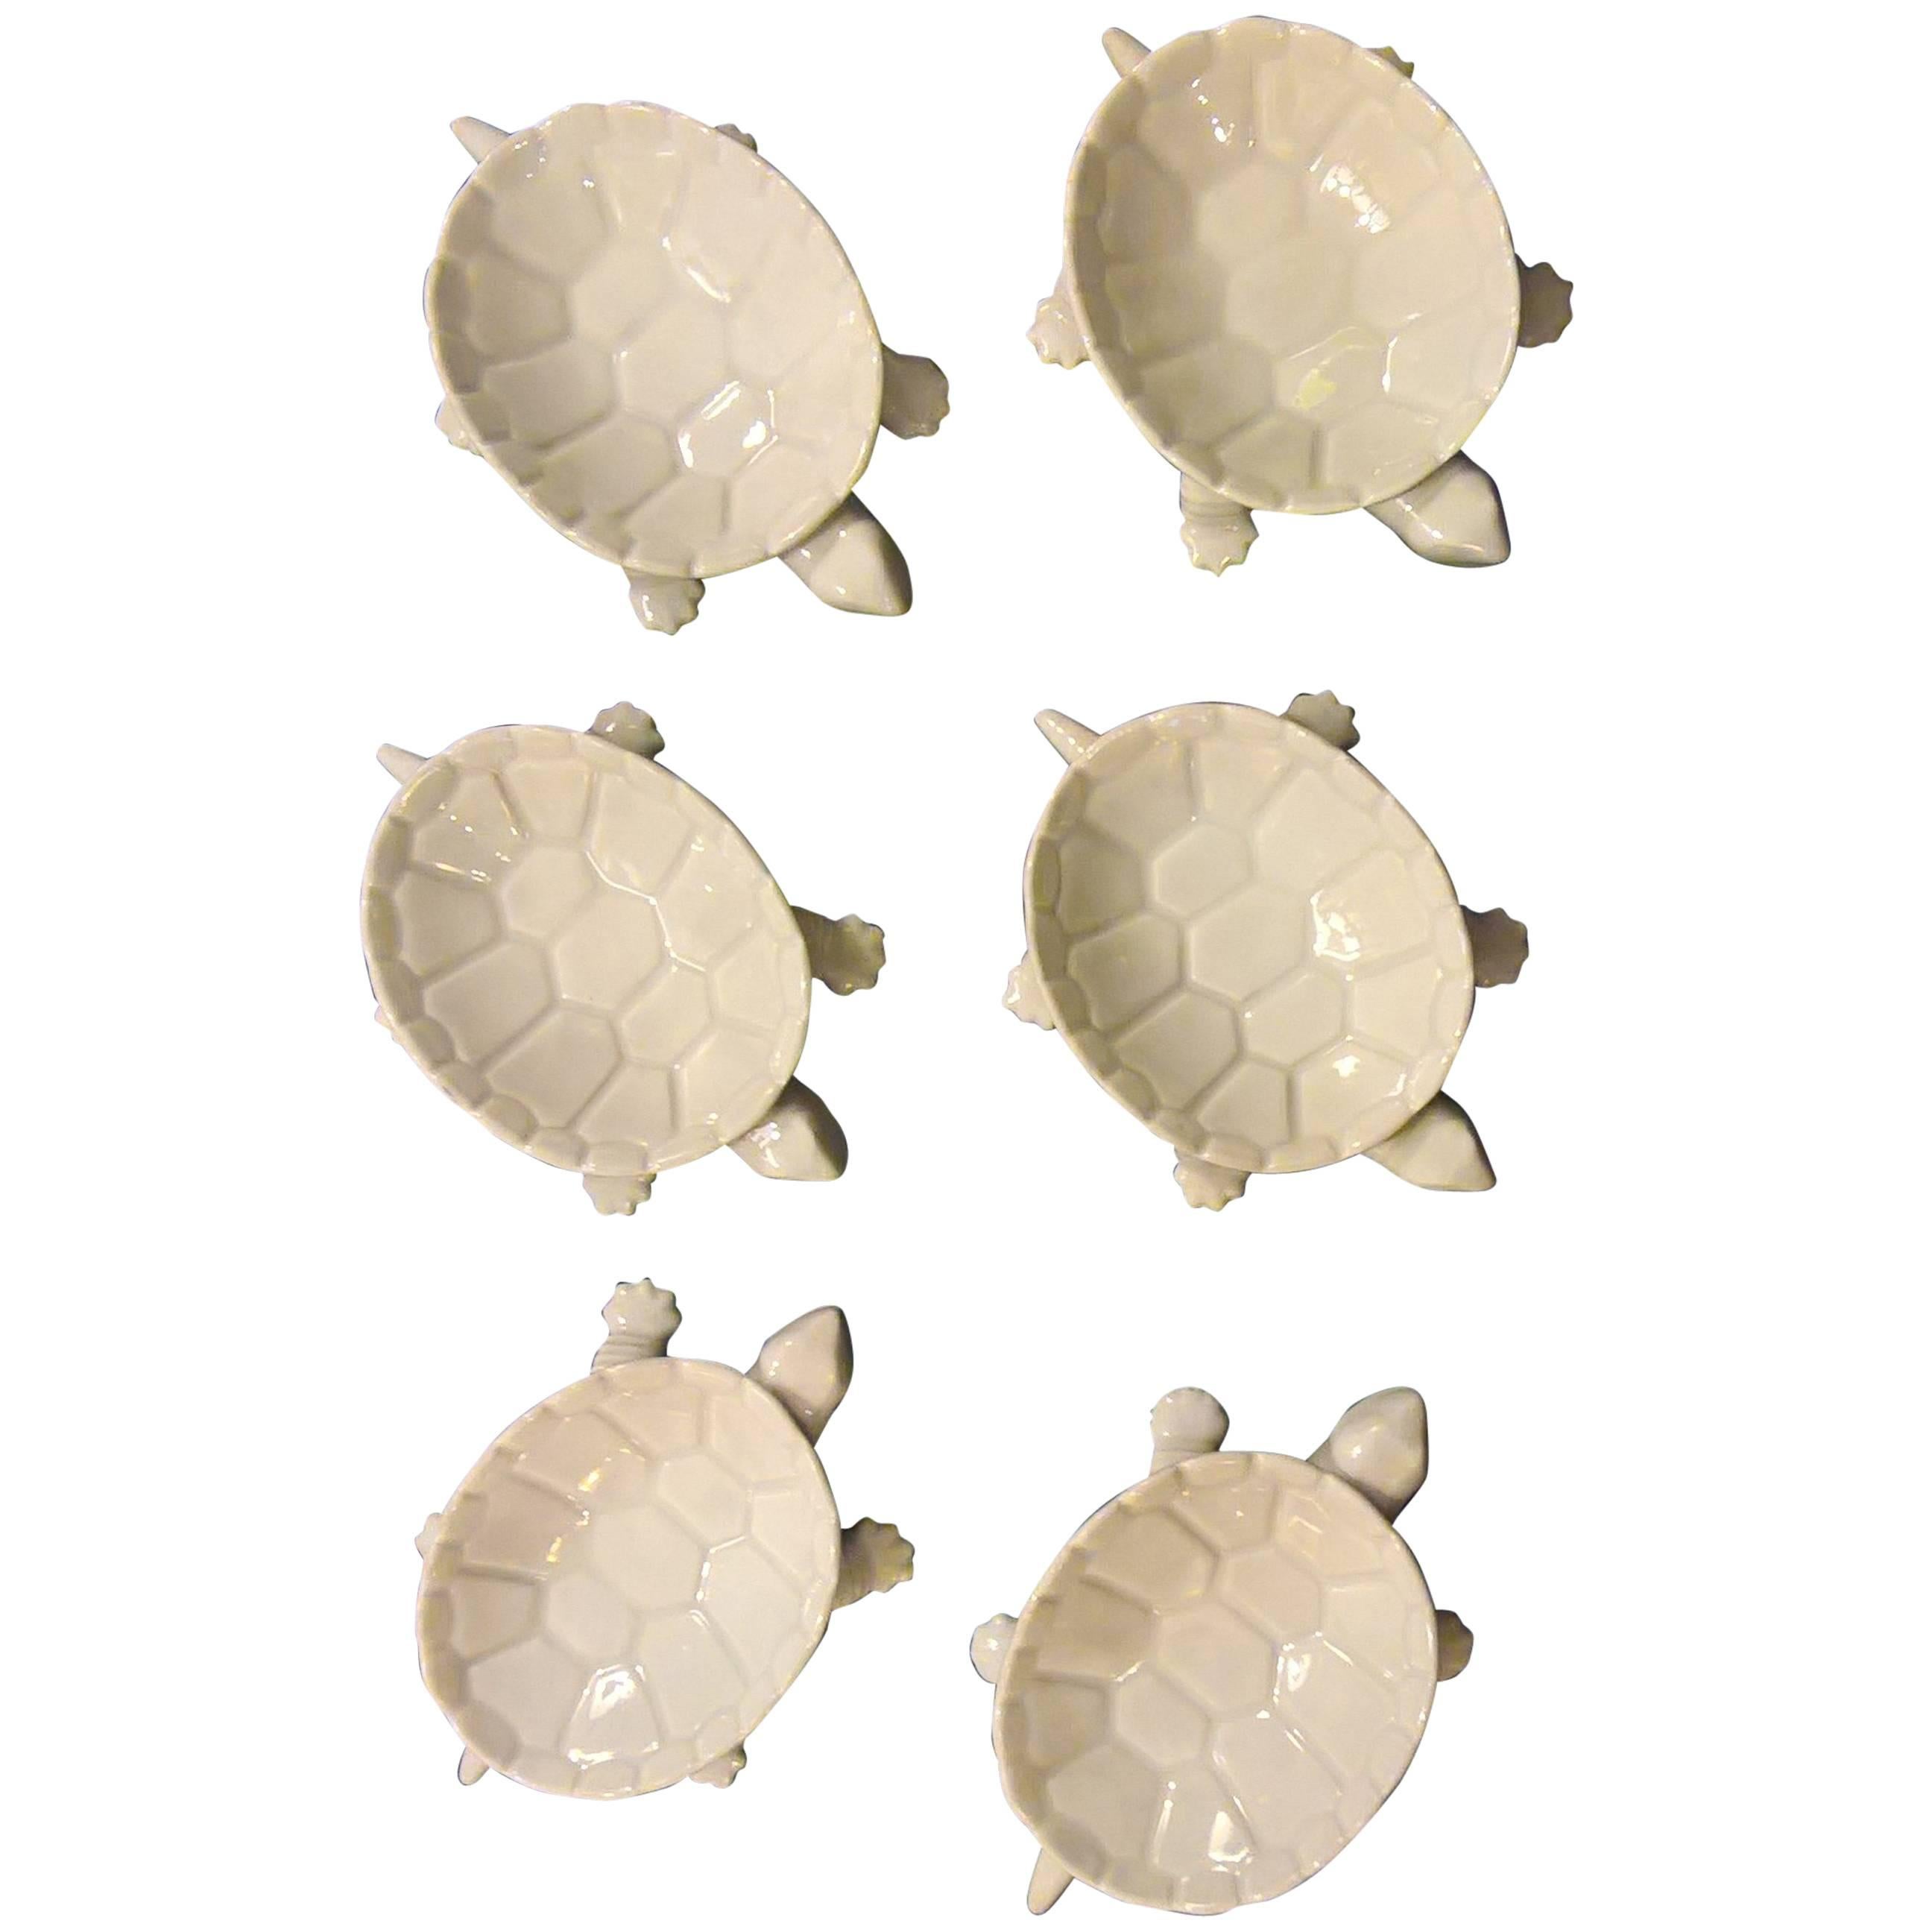 Midcentury-Modern Set of Six KPM Turtle Dishes in White Porcelain